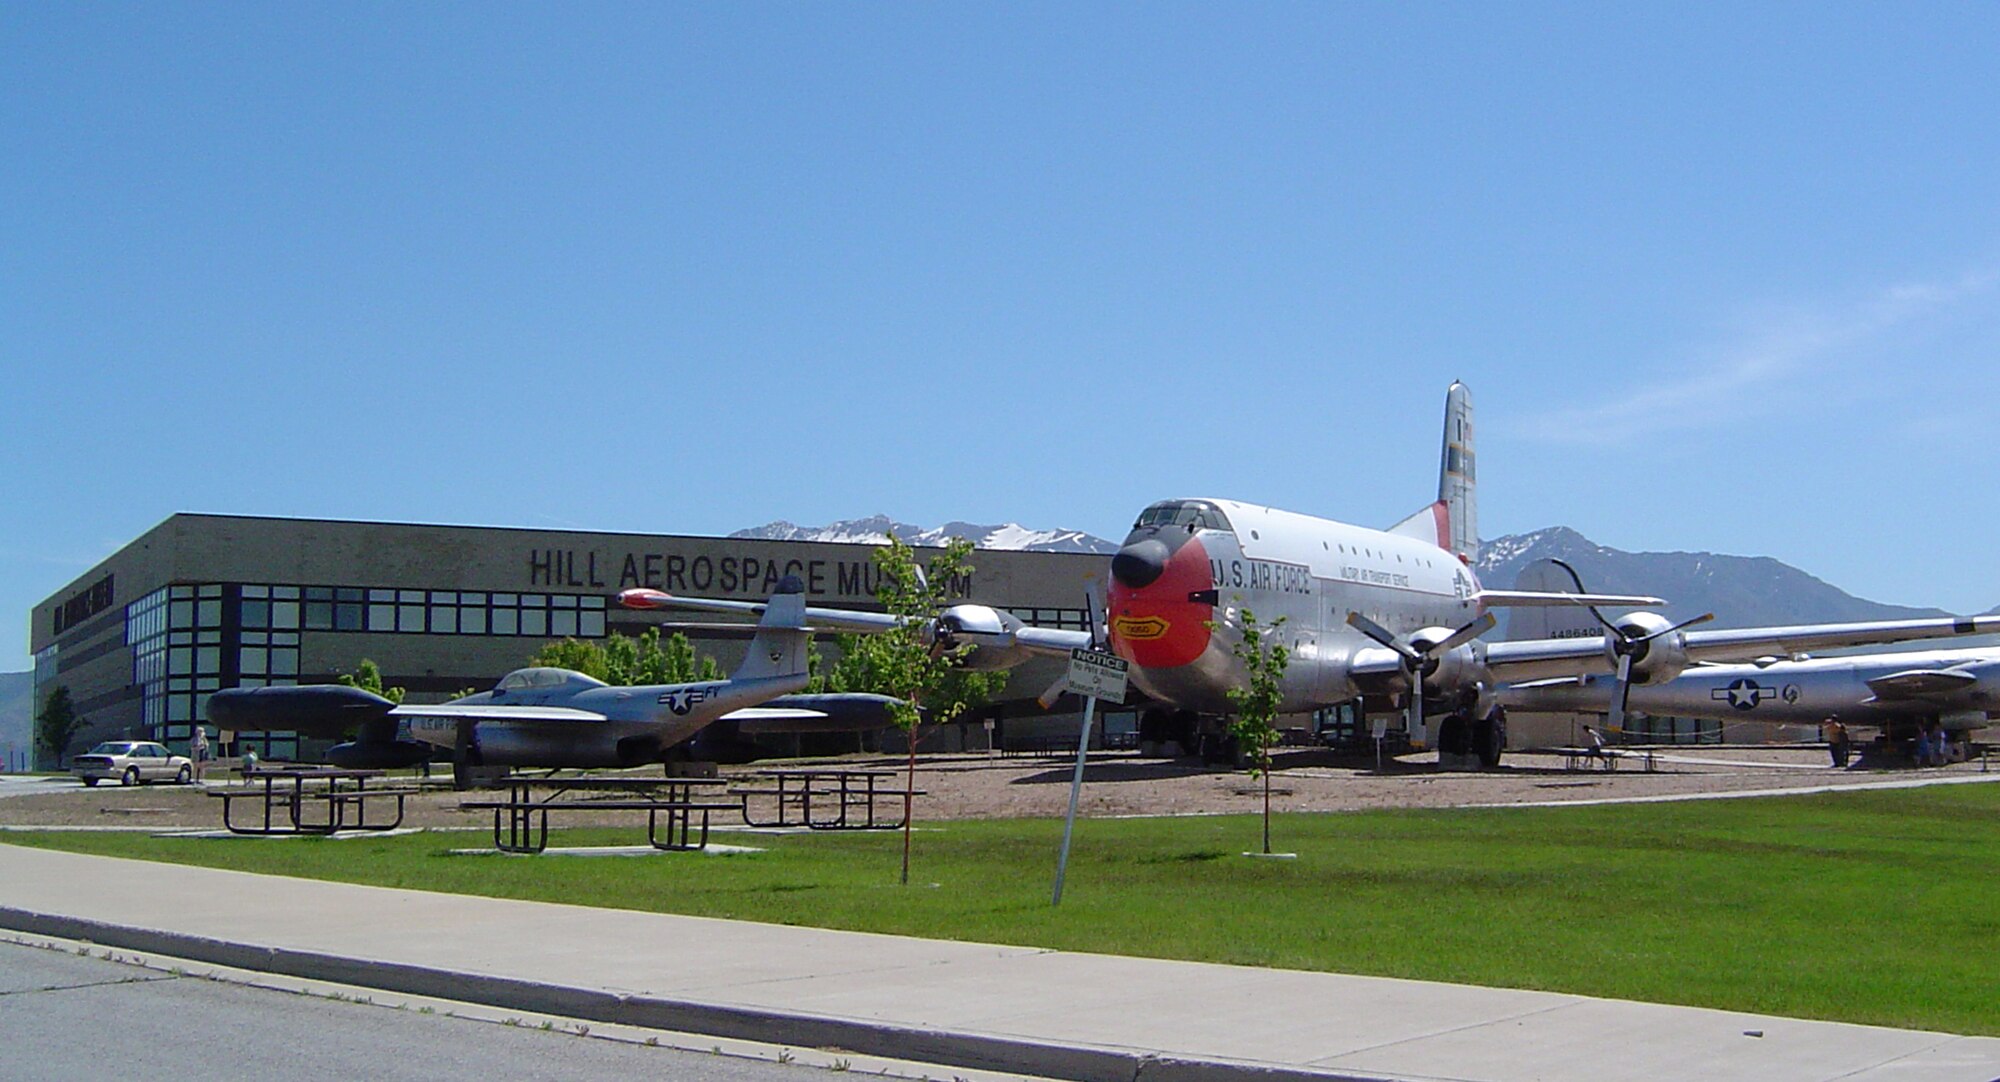 As a field museum of the United States Air Force Museum System, Hill Aerospace Museum’s mission is to portray the history of Hill Air Force Base, its tenant organizations, and the assignments of the Ogden Air Logistics Center. (Courtesy Photo)